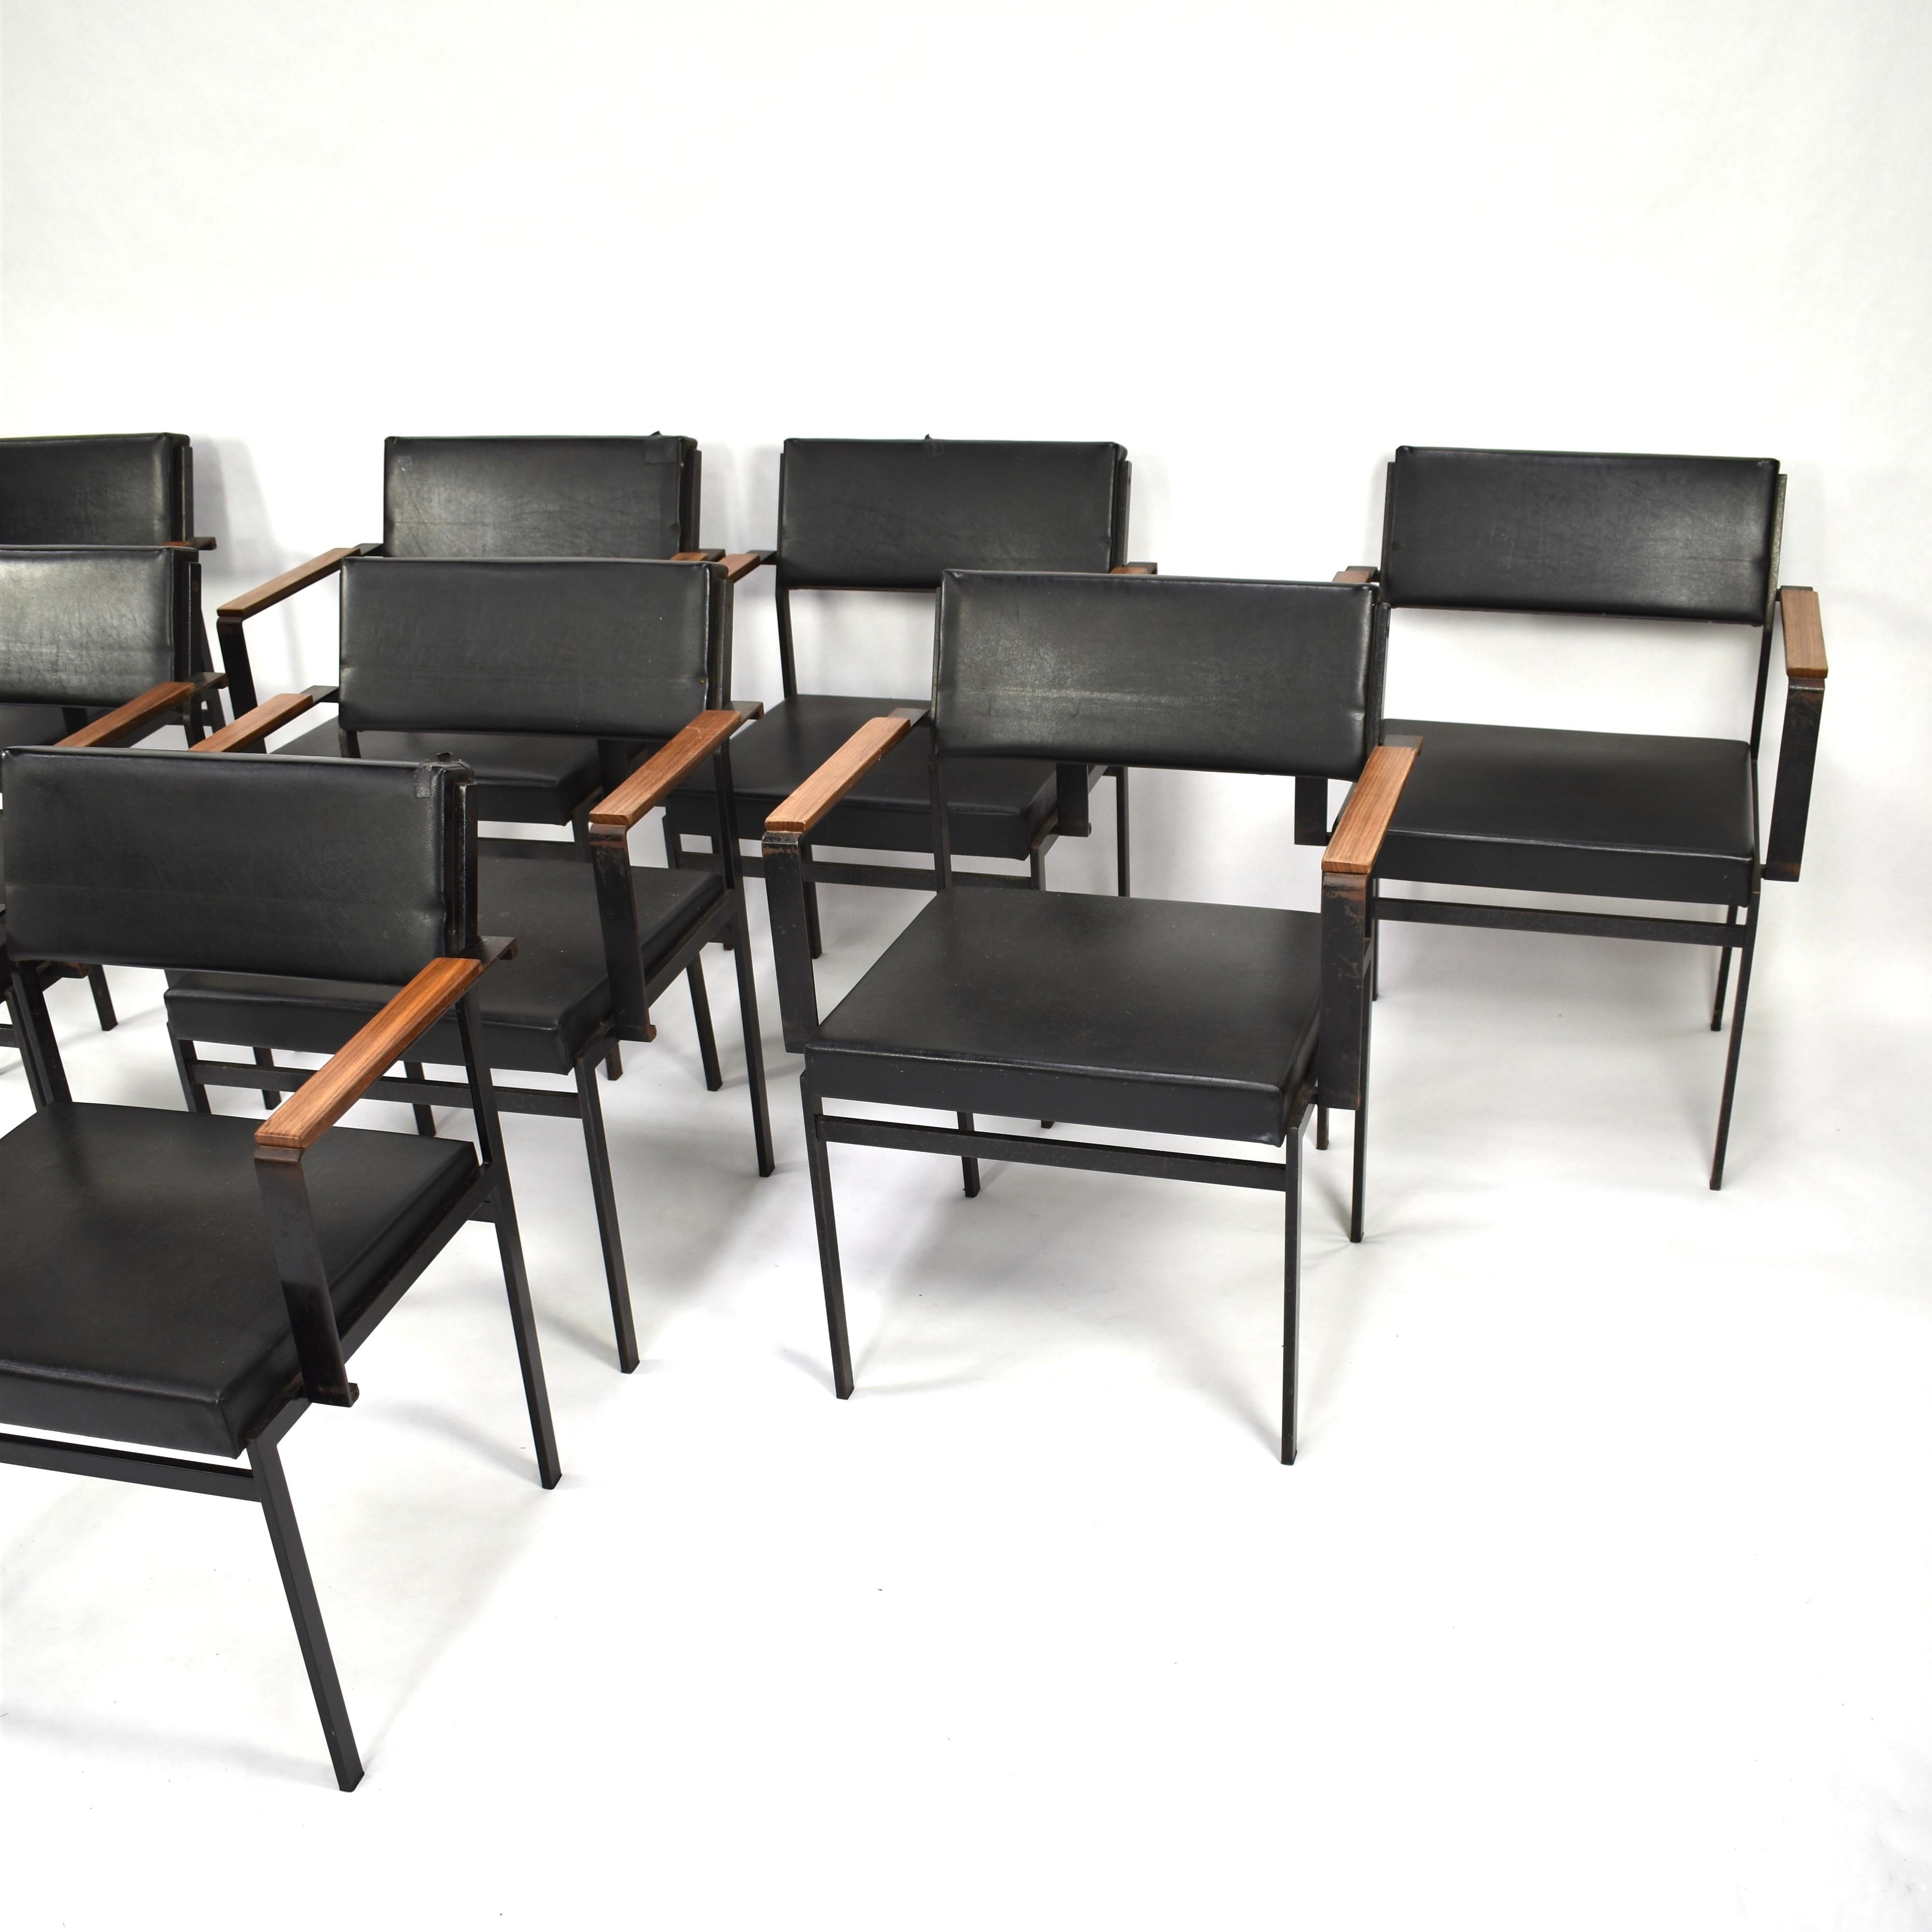 Dutch 7 Japanese Series FM17 Dining Chairs by Cees Braakman for Pastoe, circa 1950